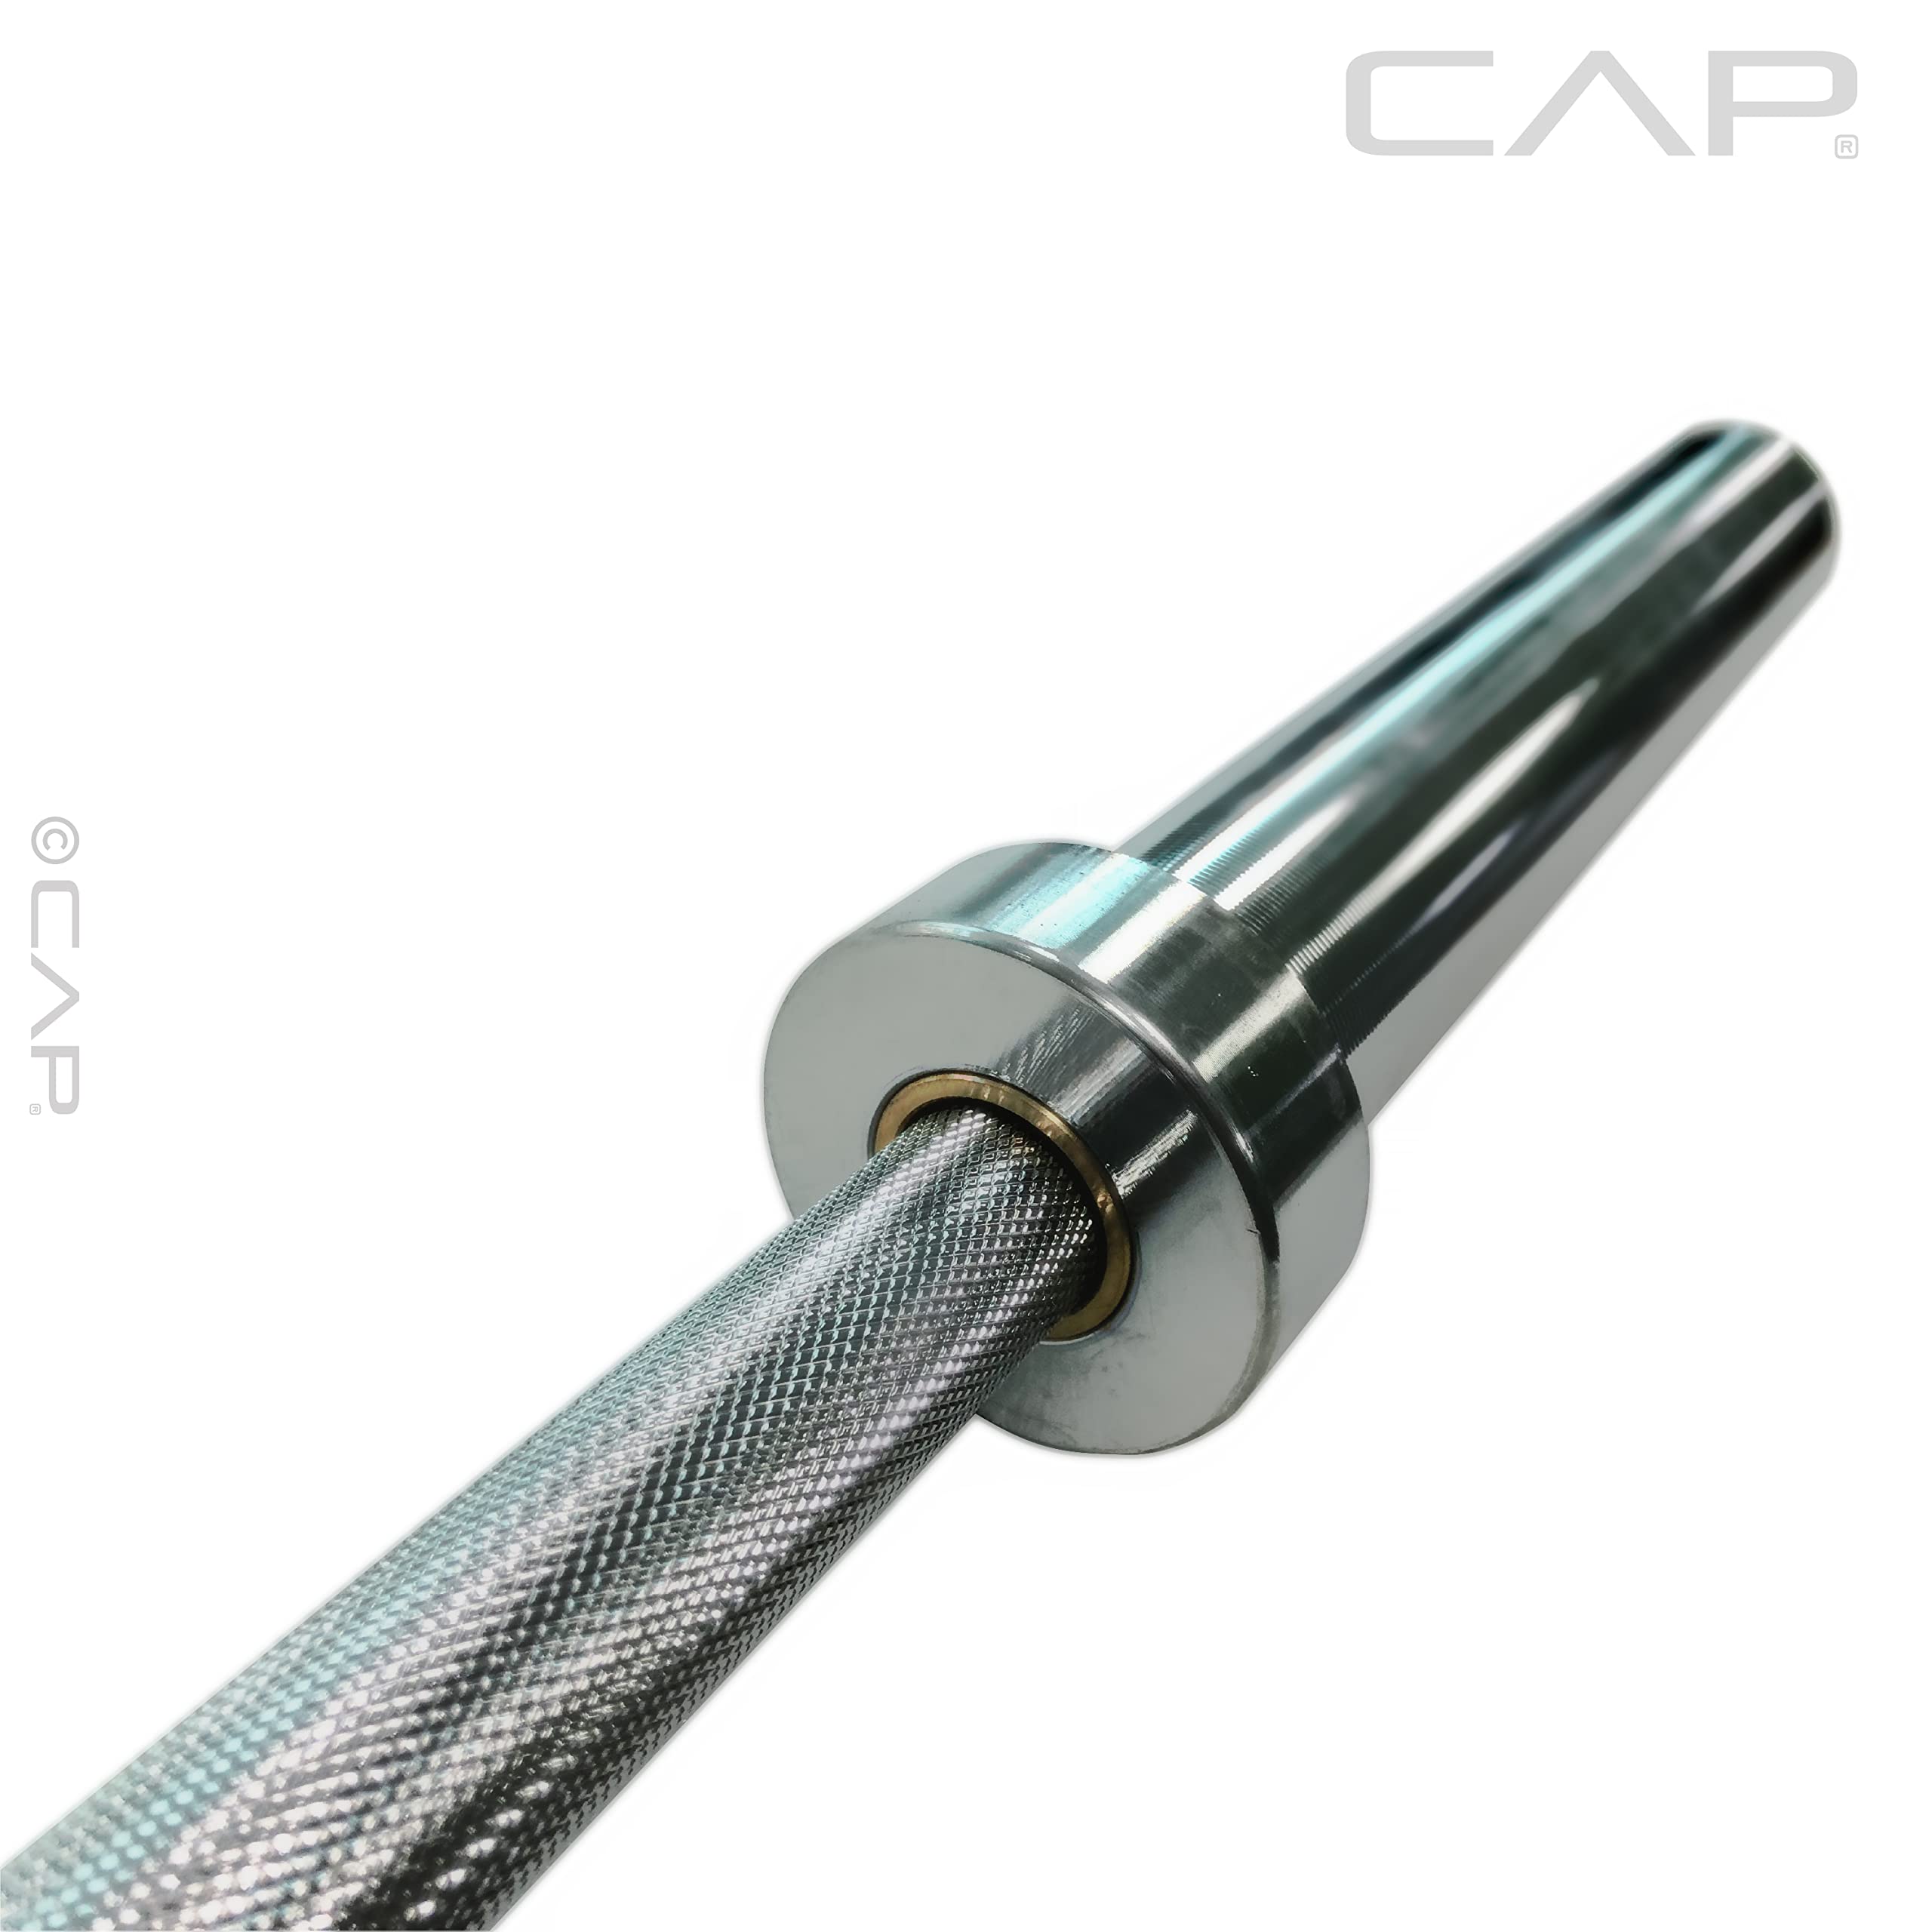 CAP Barbell 2' Olympic Solid 5 ft Bar, Bronze Bushings, Chrome (New Version) (OBIS-60-3)